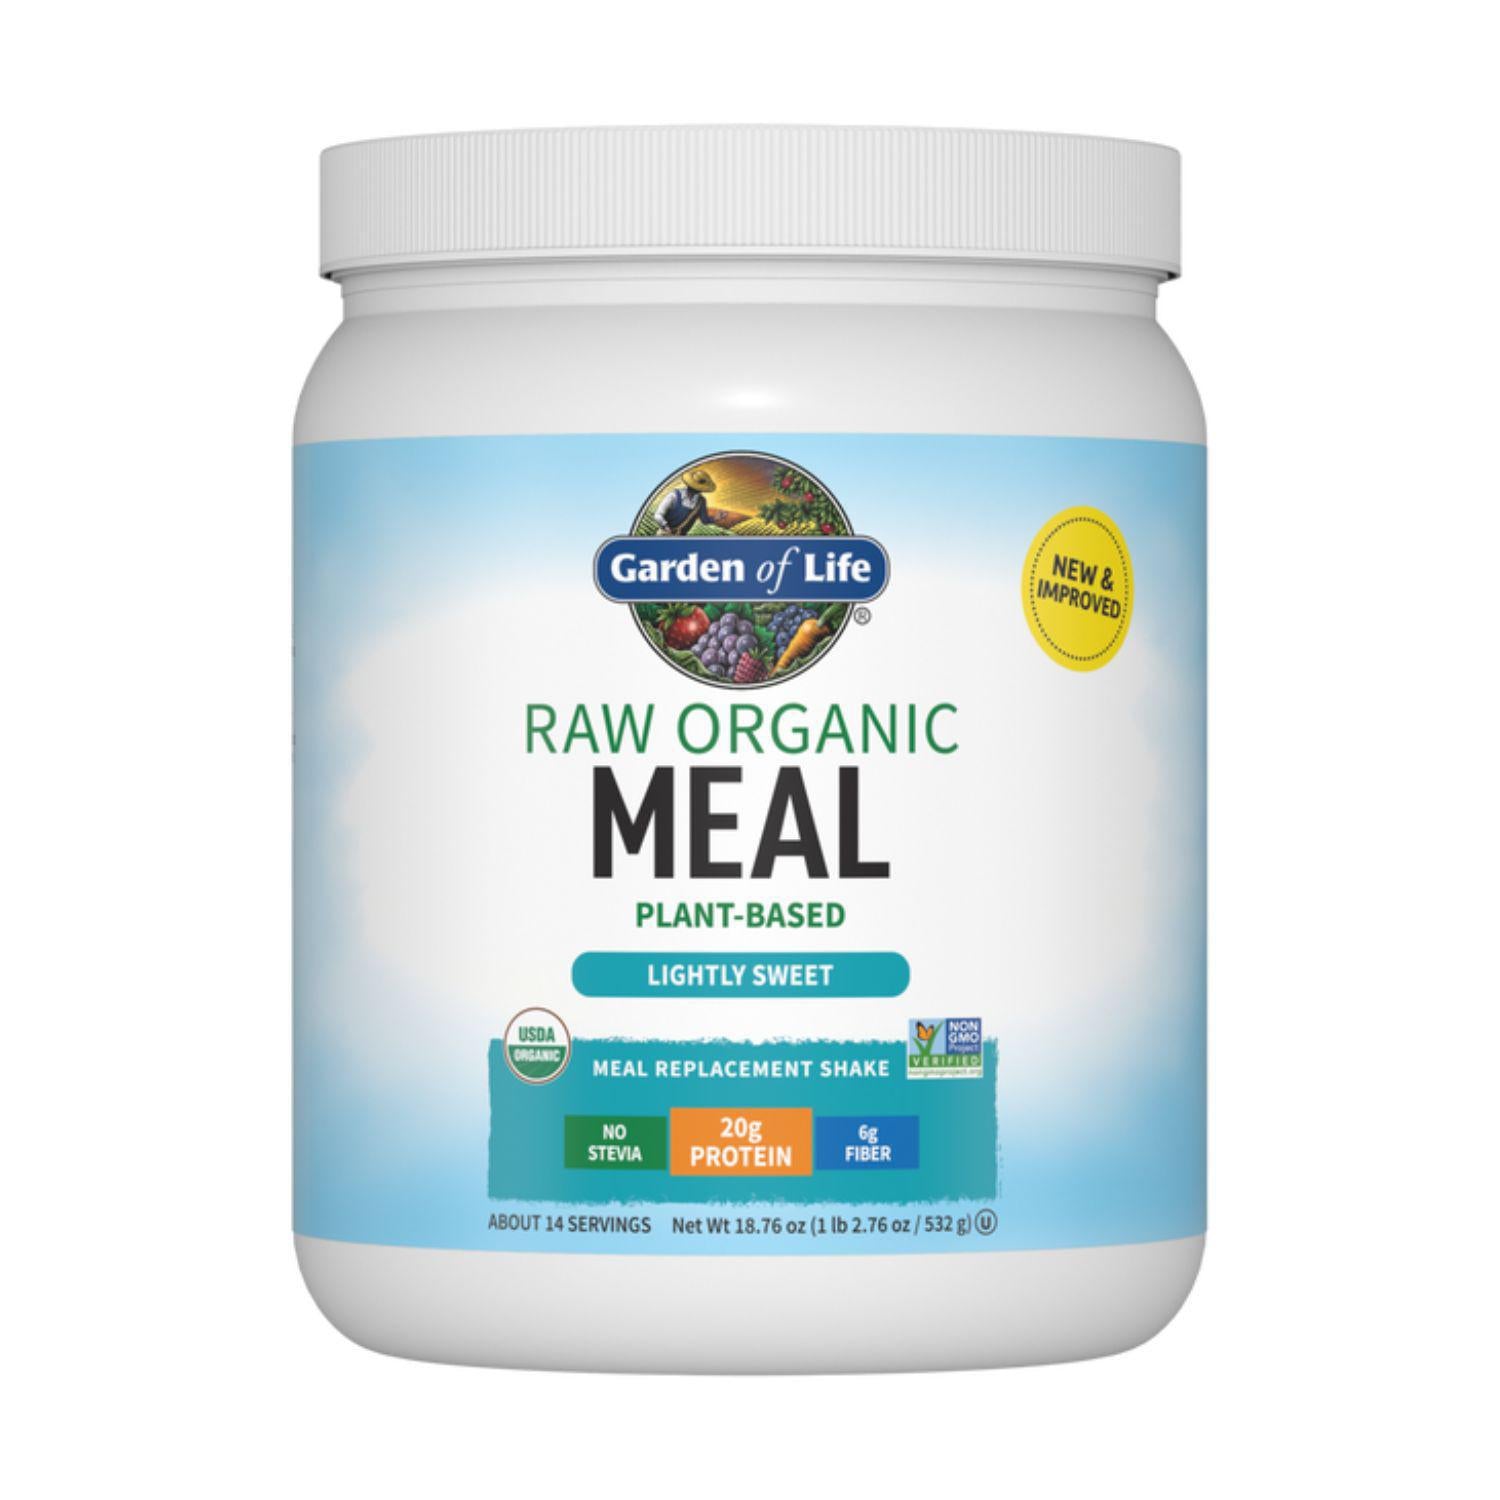 Raw Meal Replacement Powder, Lightly Sweet No Stevia 18.76 oz